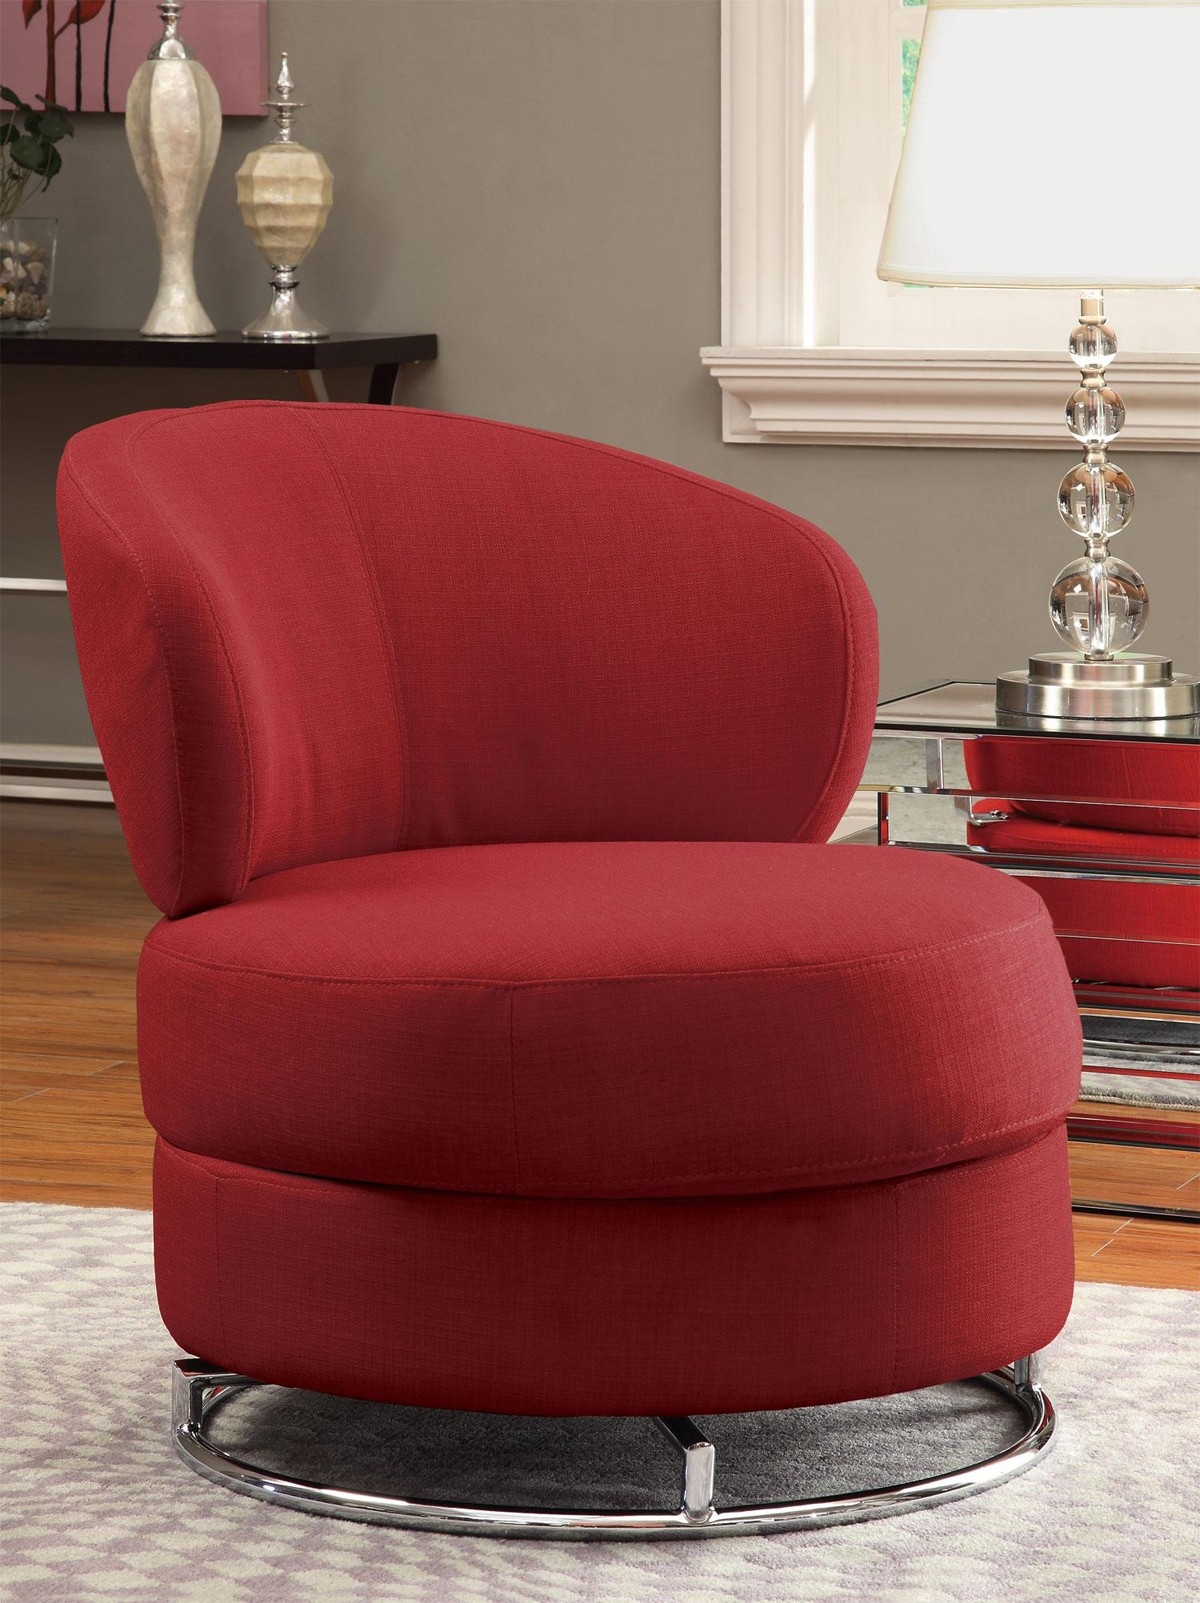 Red swivel chairs 2